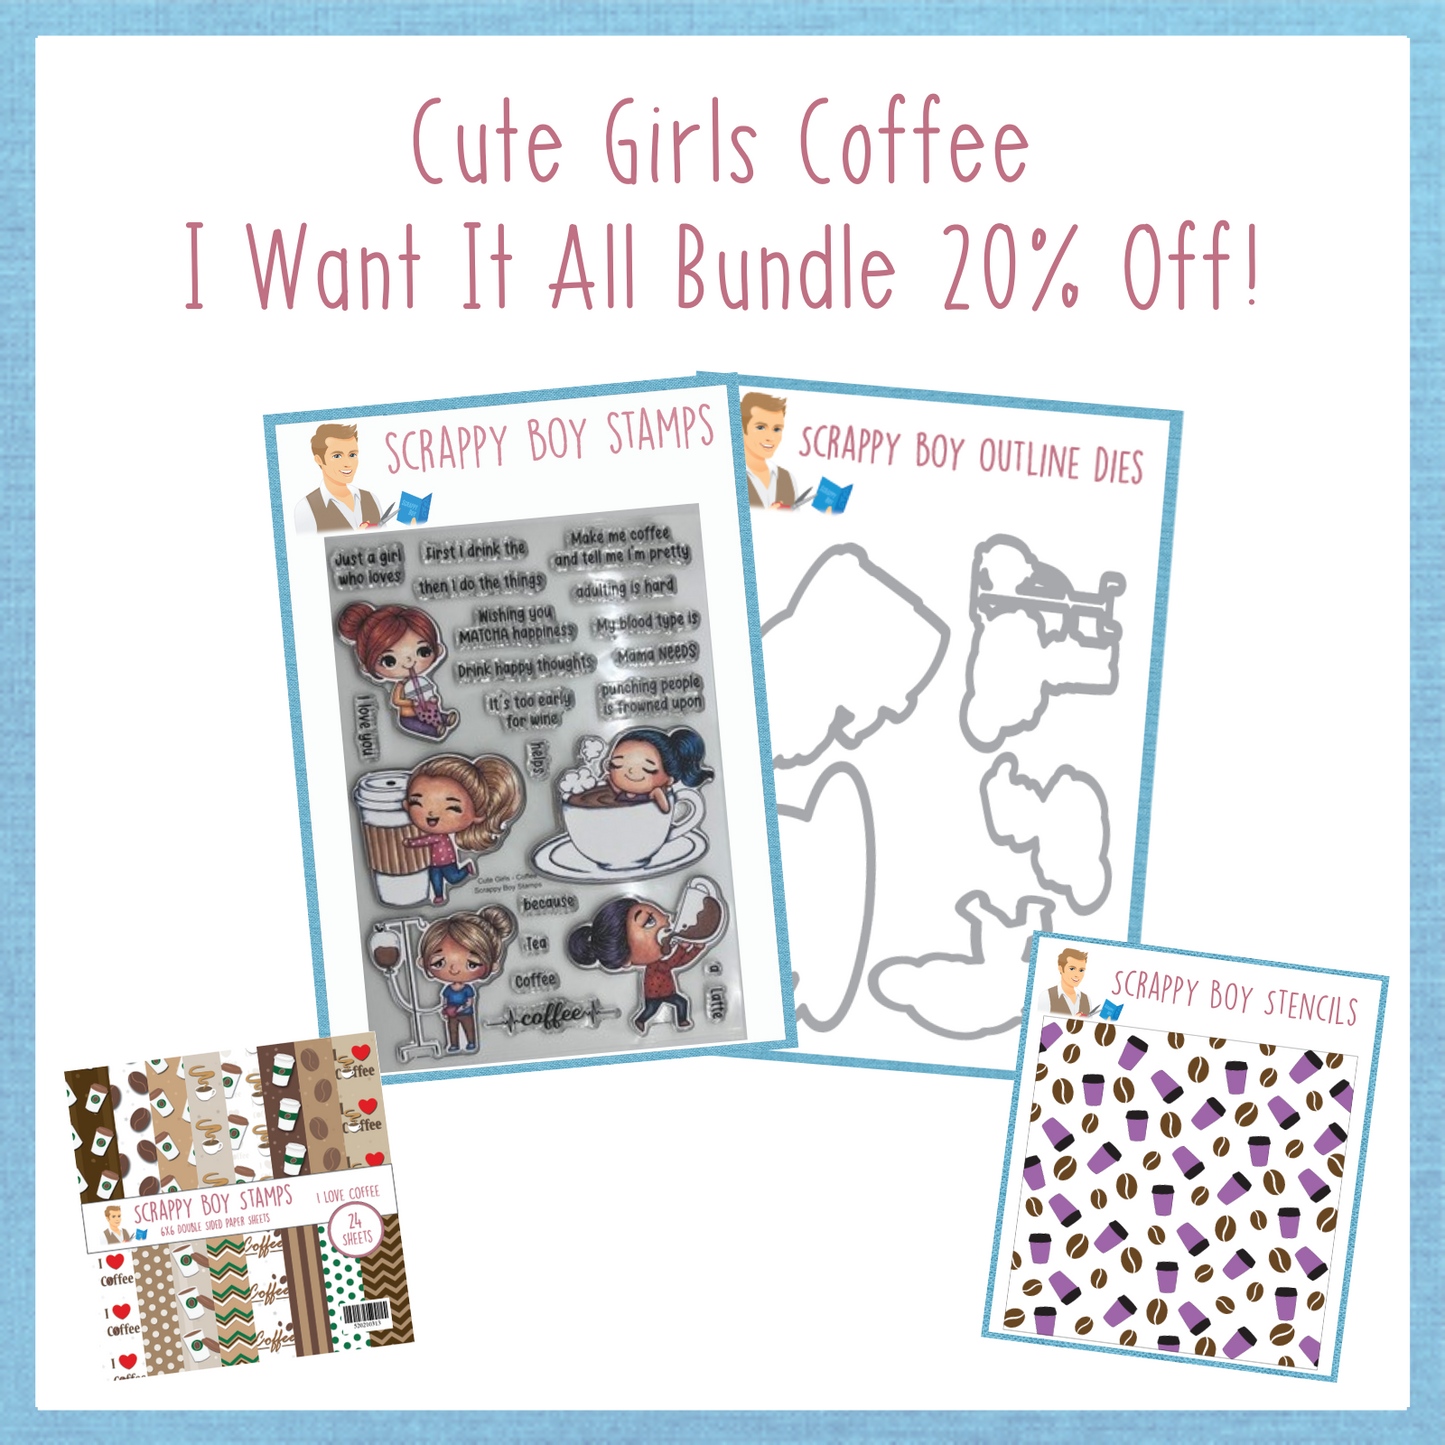 I Want It All Bundle - Cute Girls - Coffee scrappyboystamps